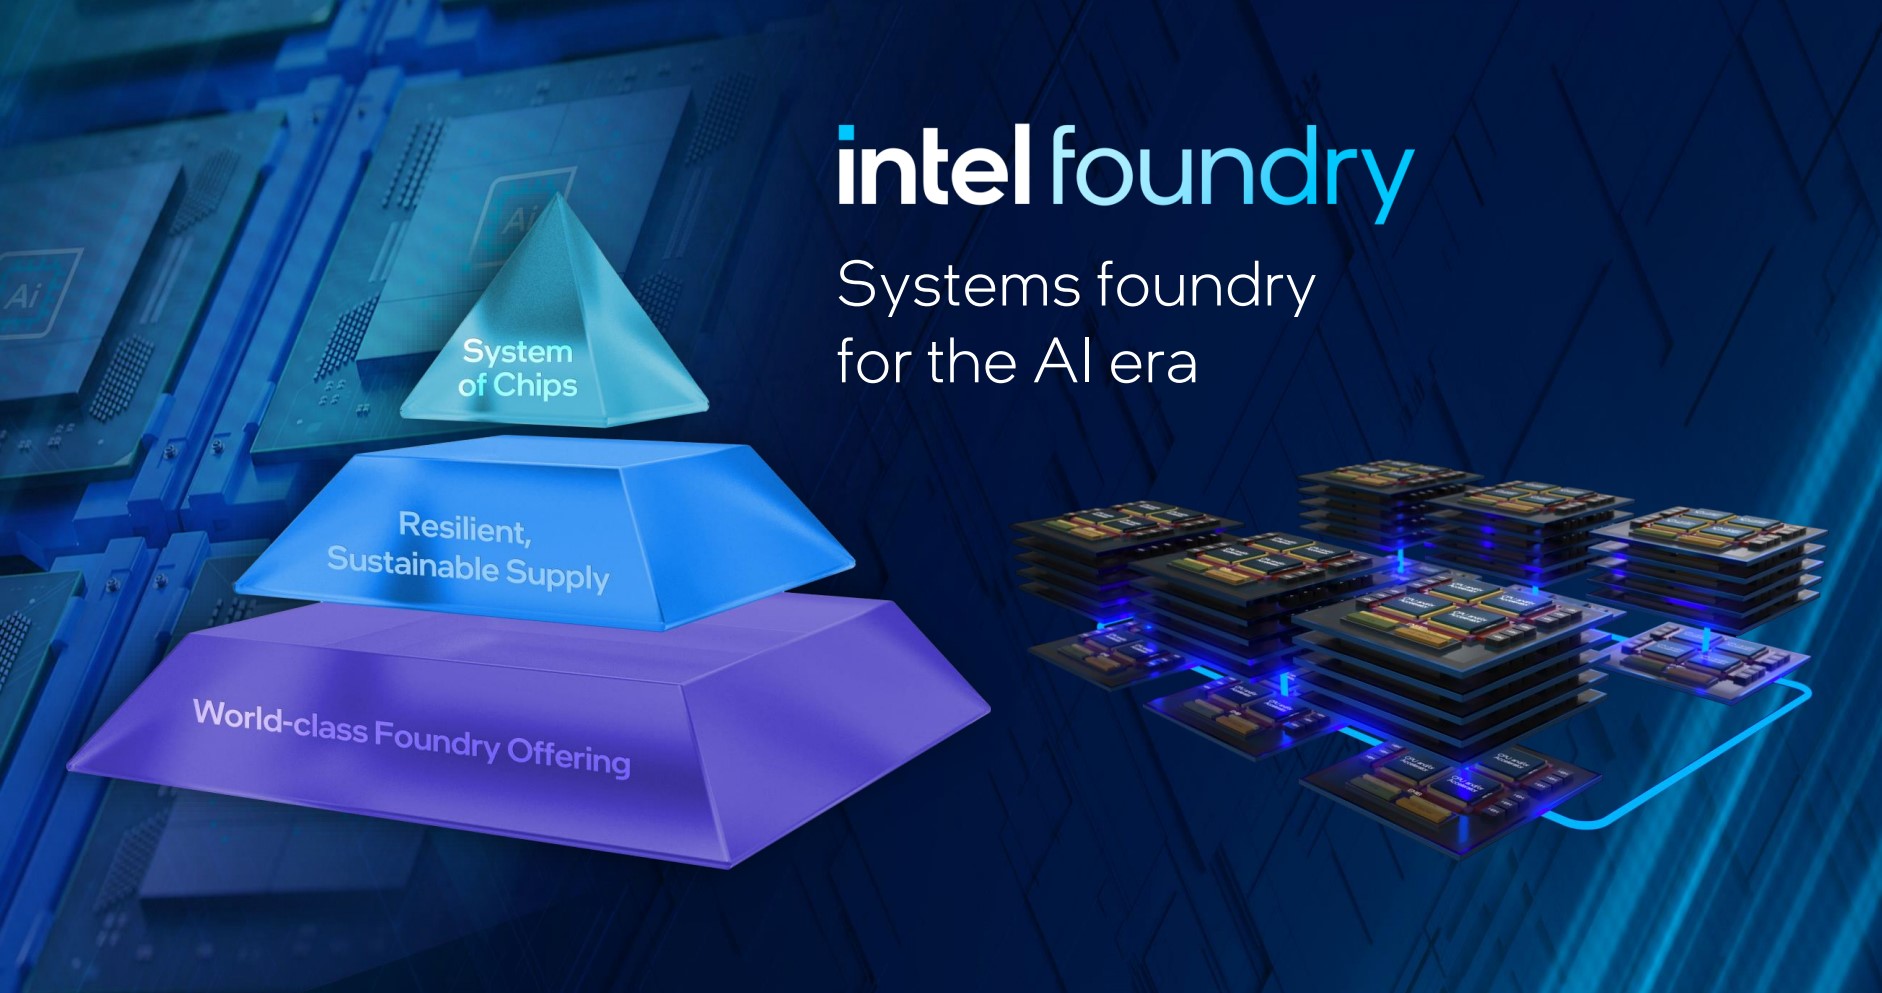 Intel wants to be the world's AI foundry.